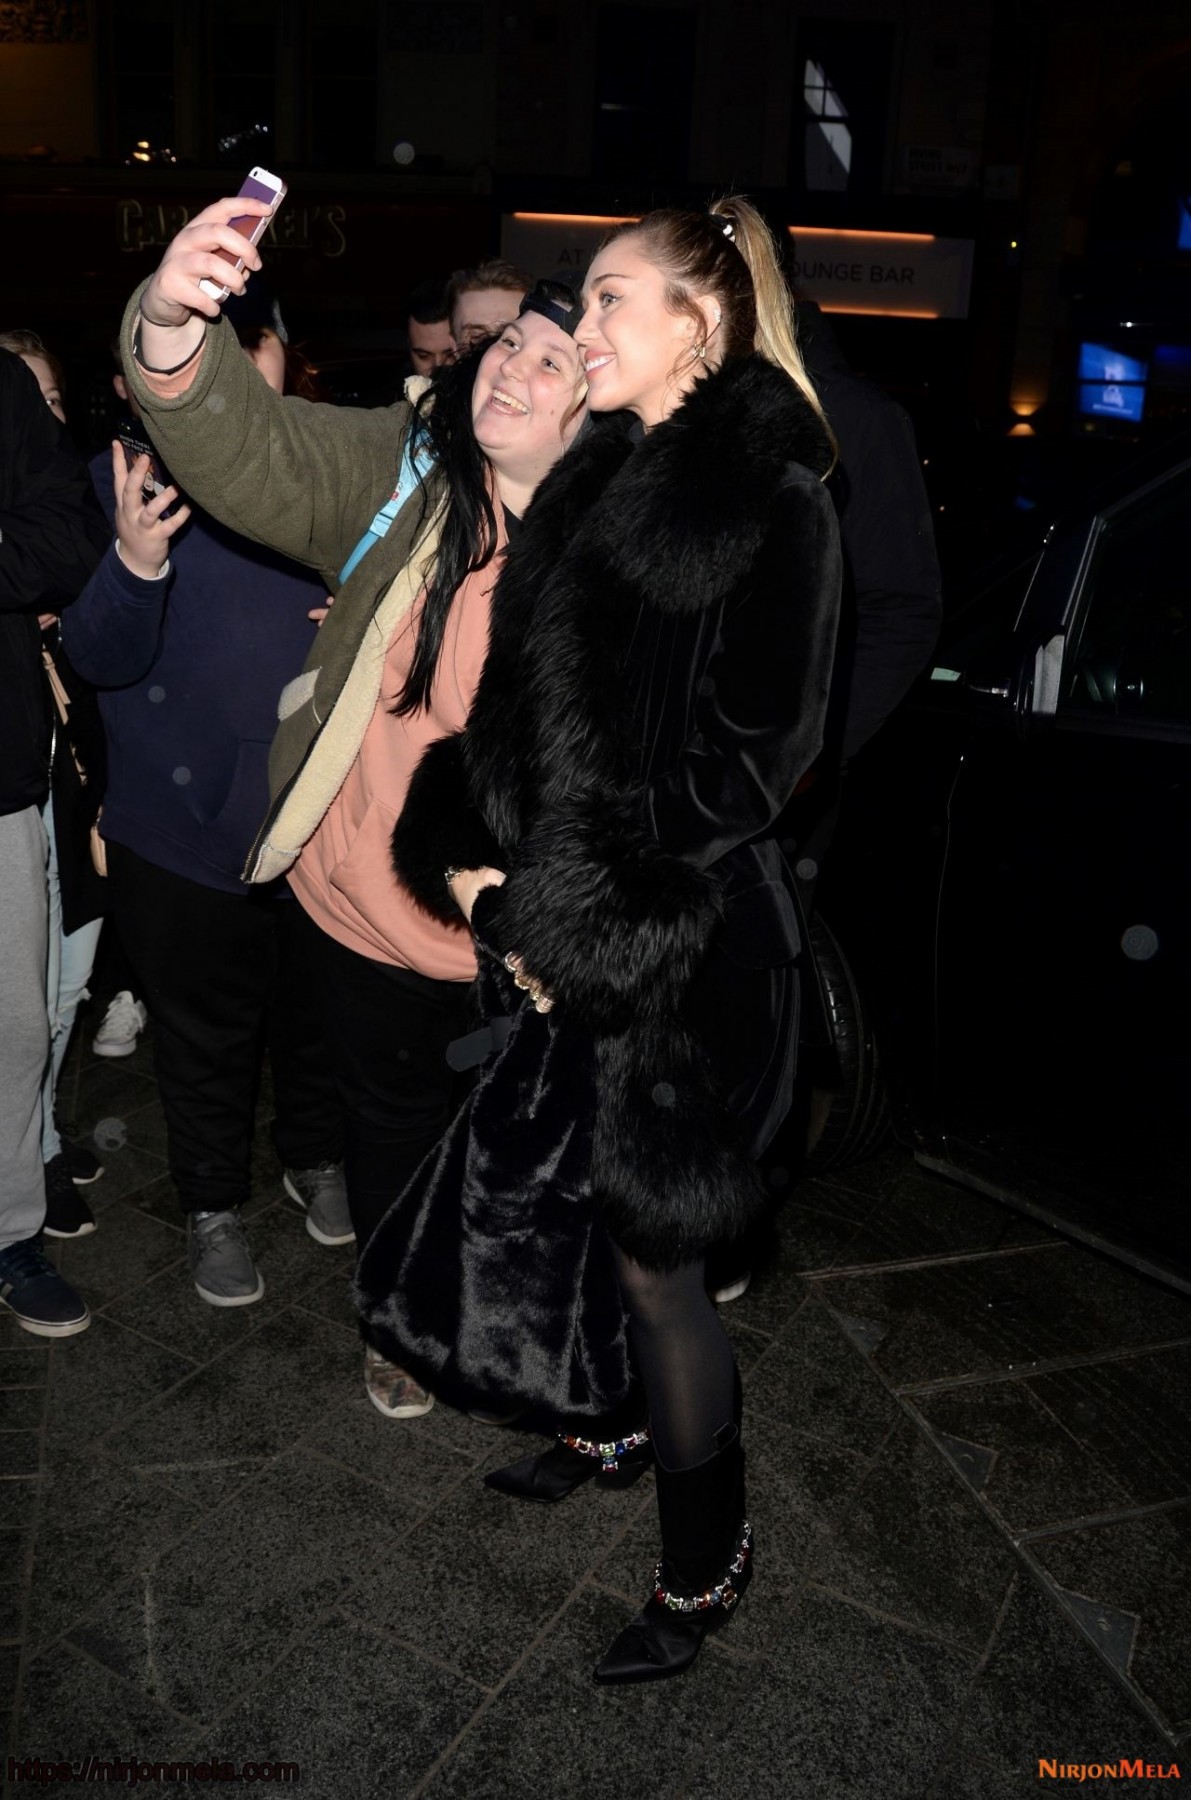 miley-cyrus-greets-fans-at-capital-radio-in-london-12-07-2018-0.jpg